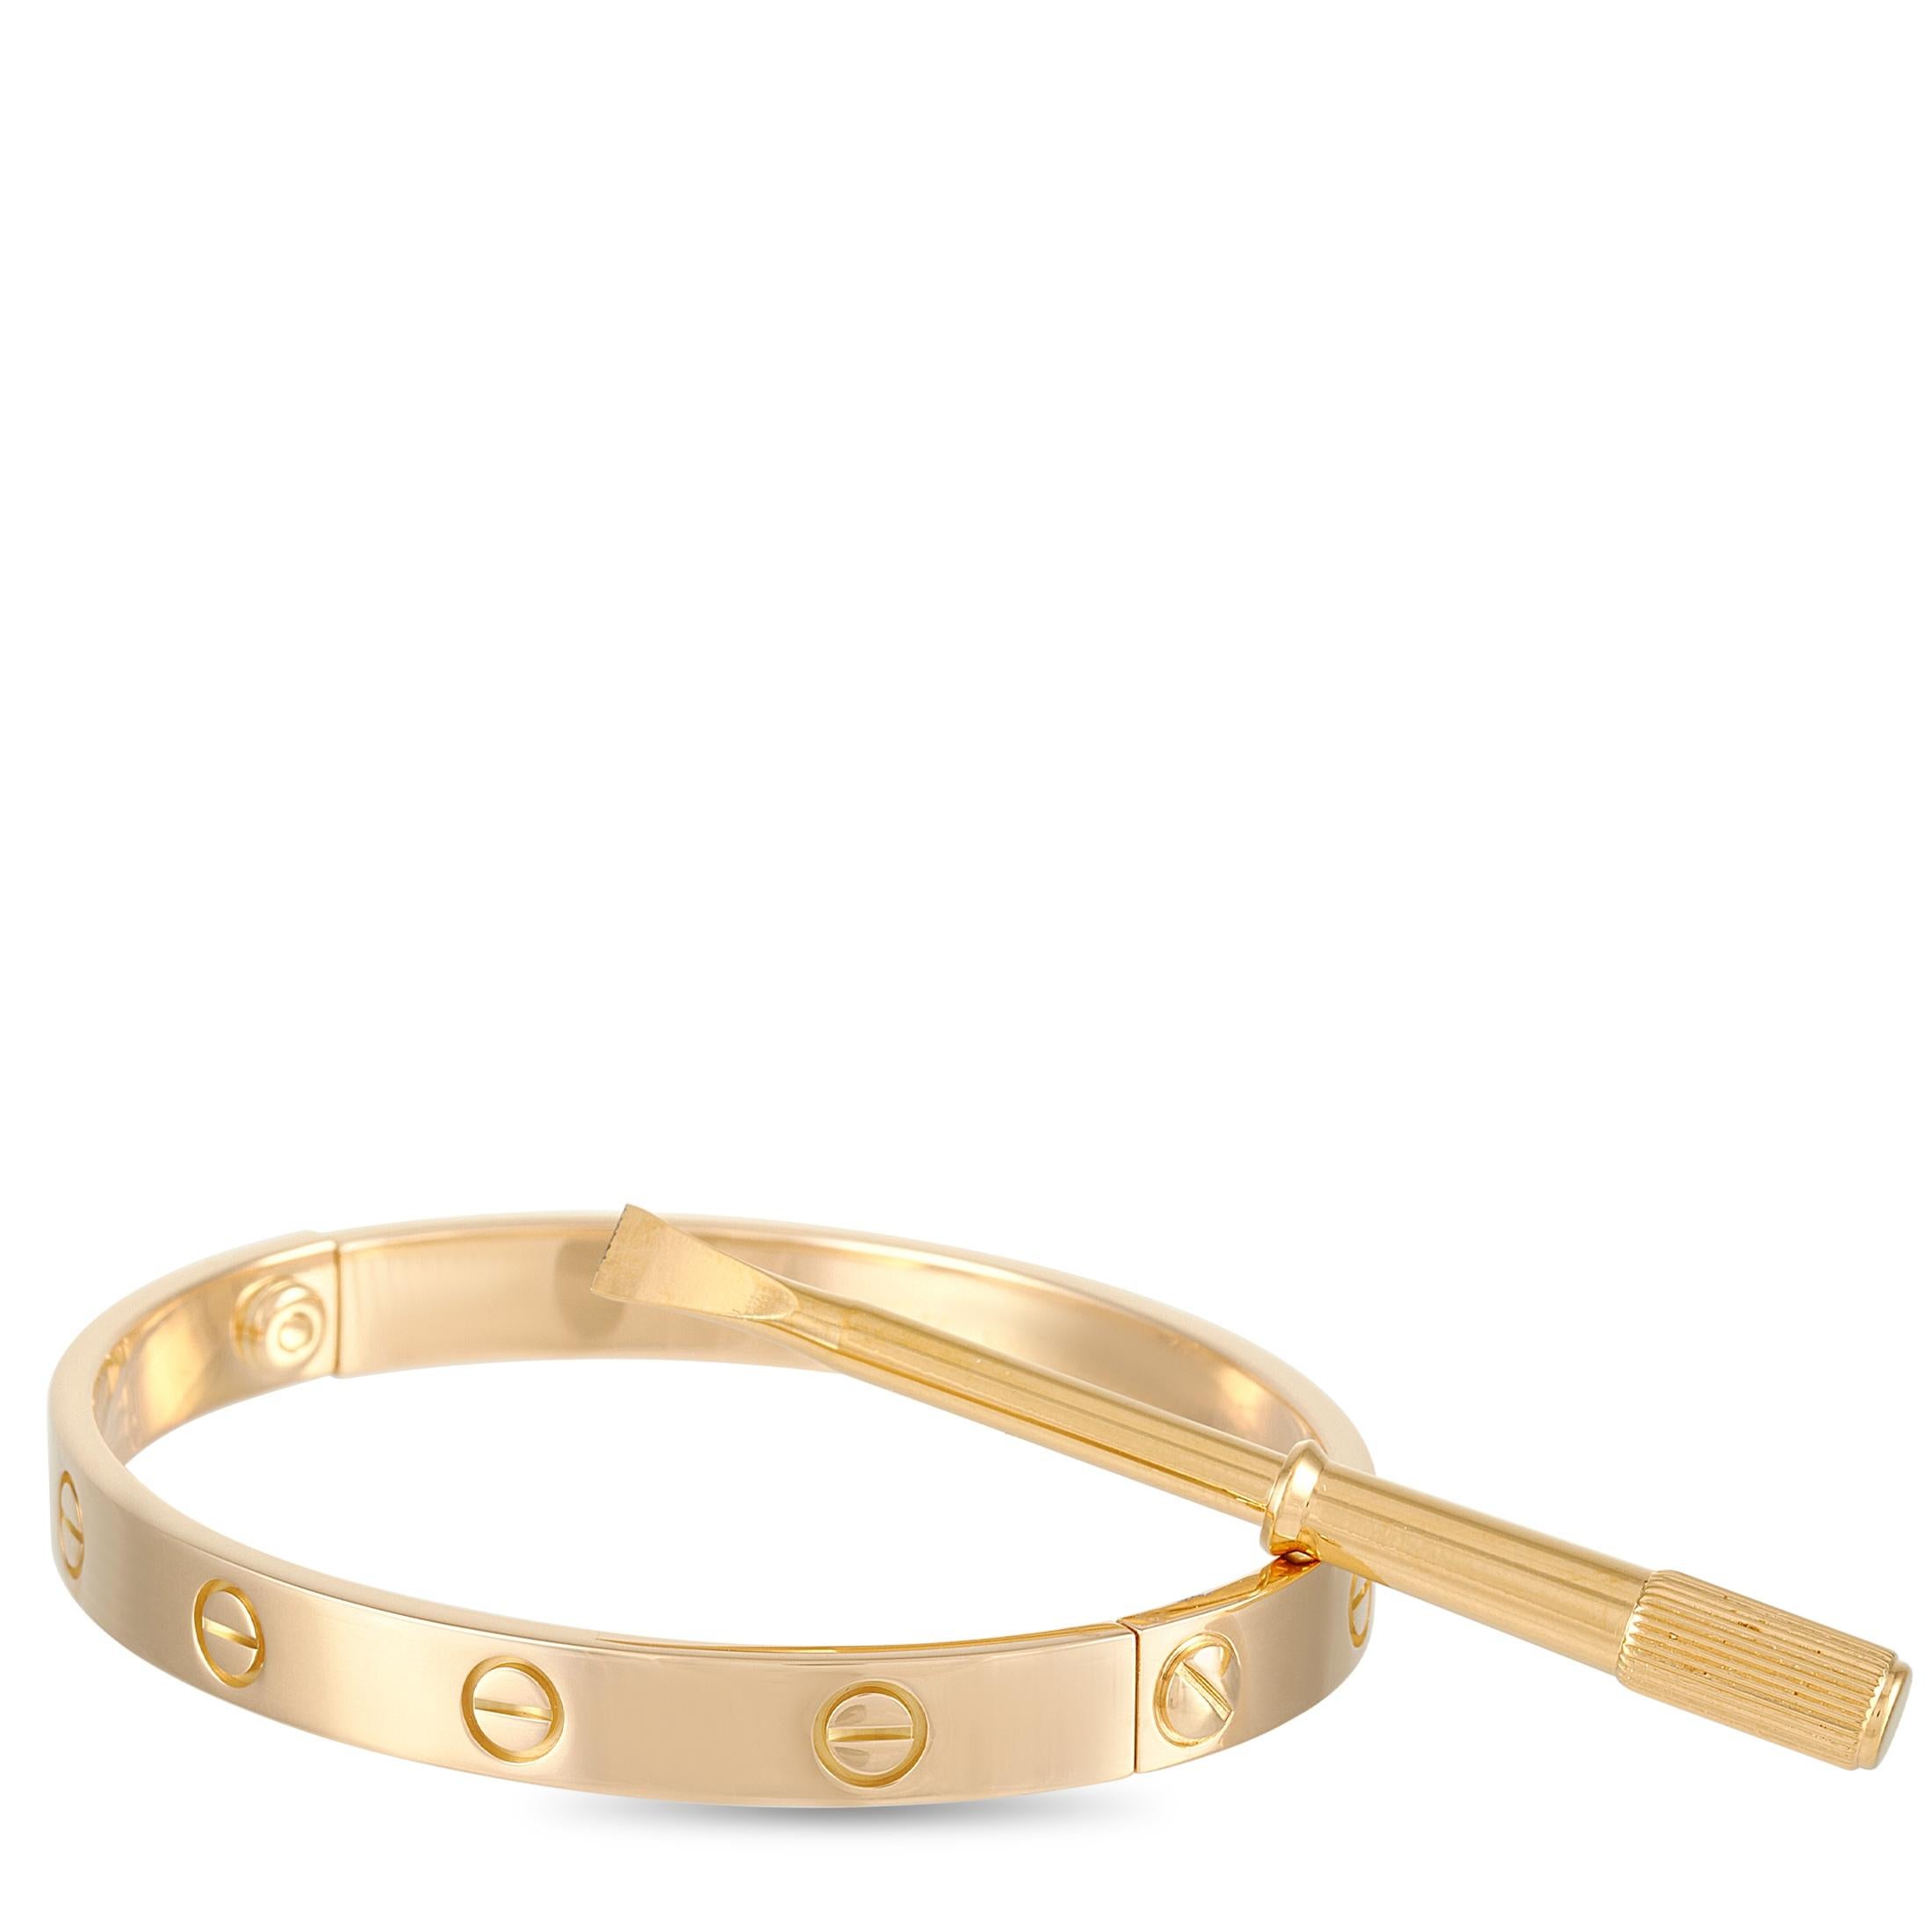 This Cartier Love 18K Yellow Gold Bangle Bracelet is a classic Cartier offering and includes a screwdriver. The simple bangle is made with 18K yellow gold and features the iconic Cartier screw motif. The inside of the bangle is inscribed with the